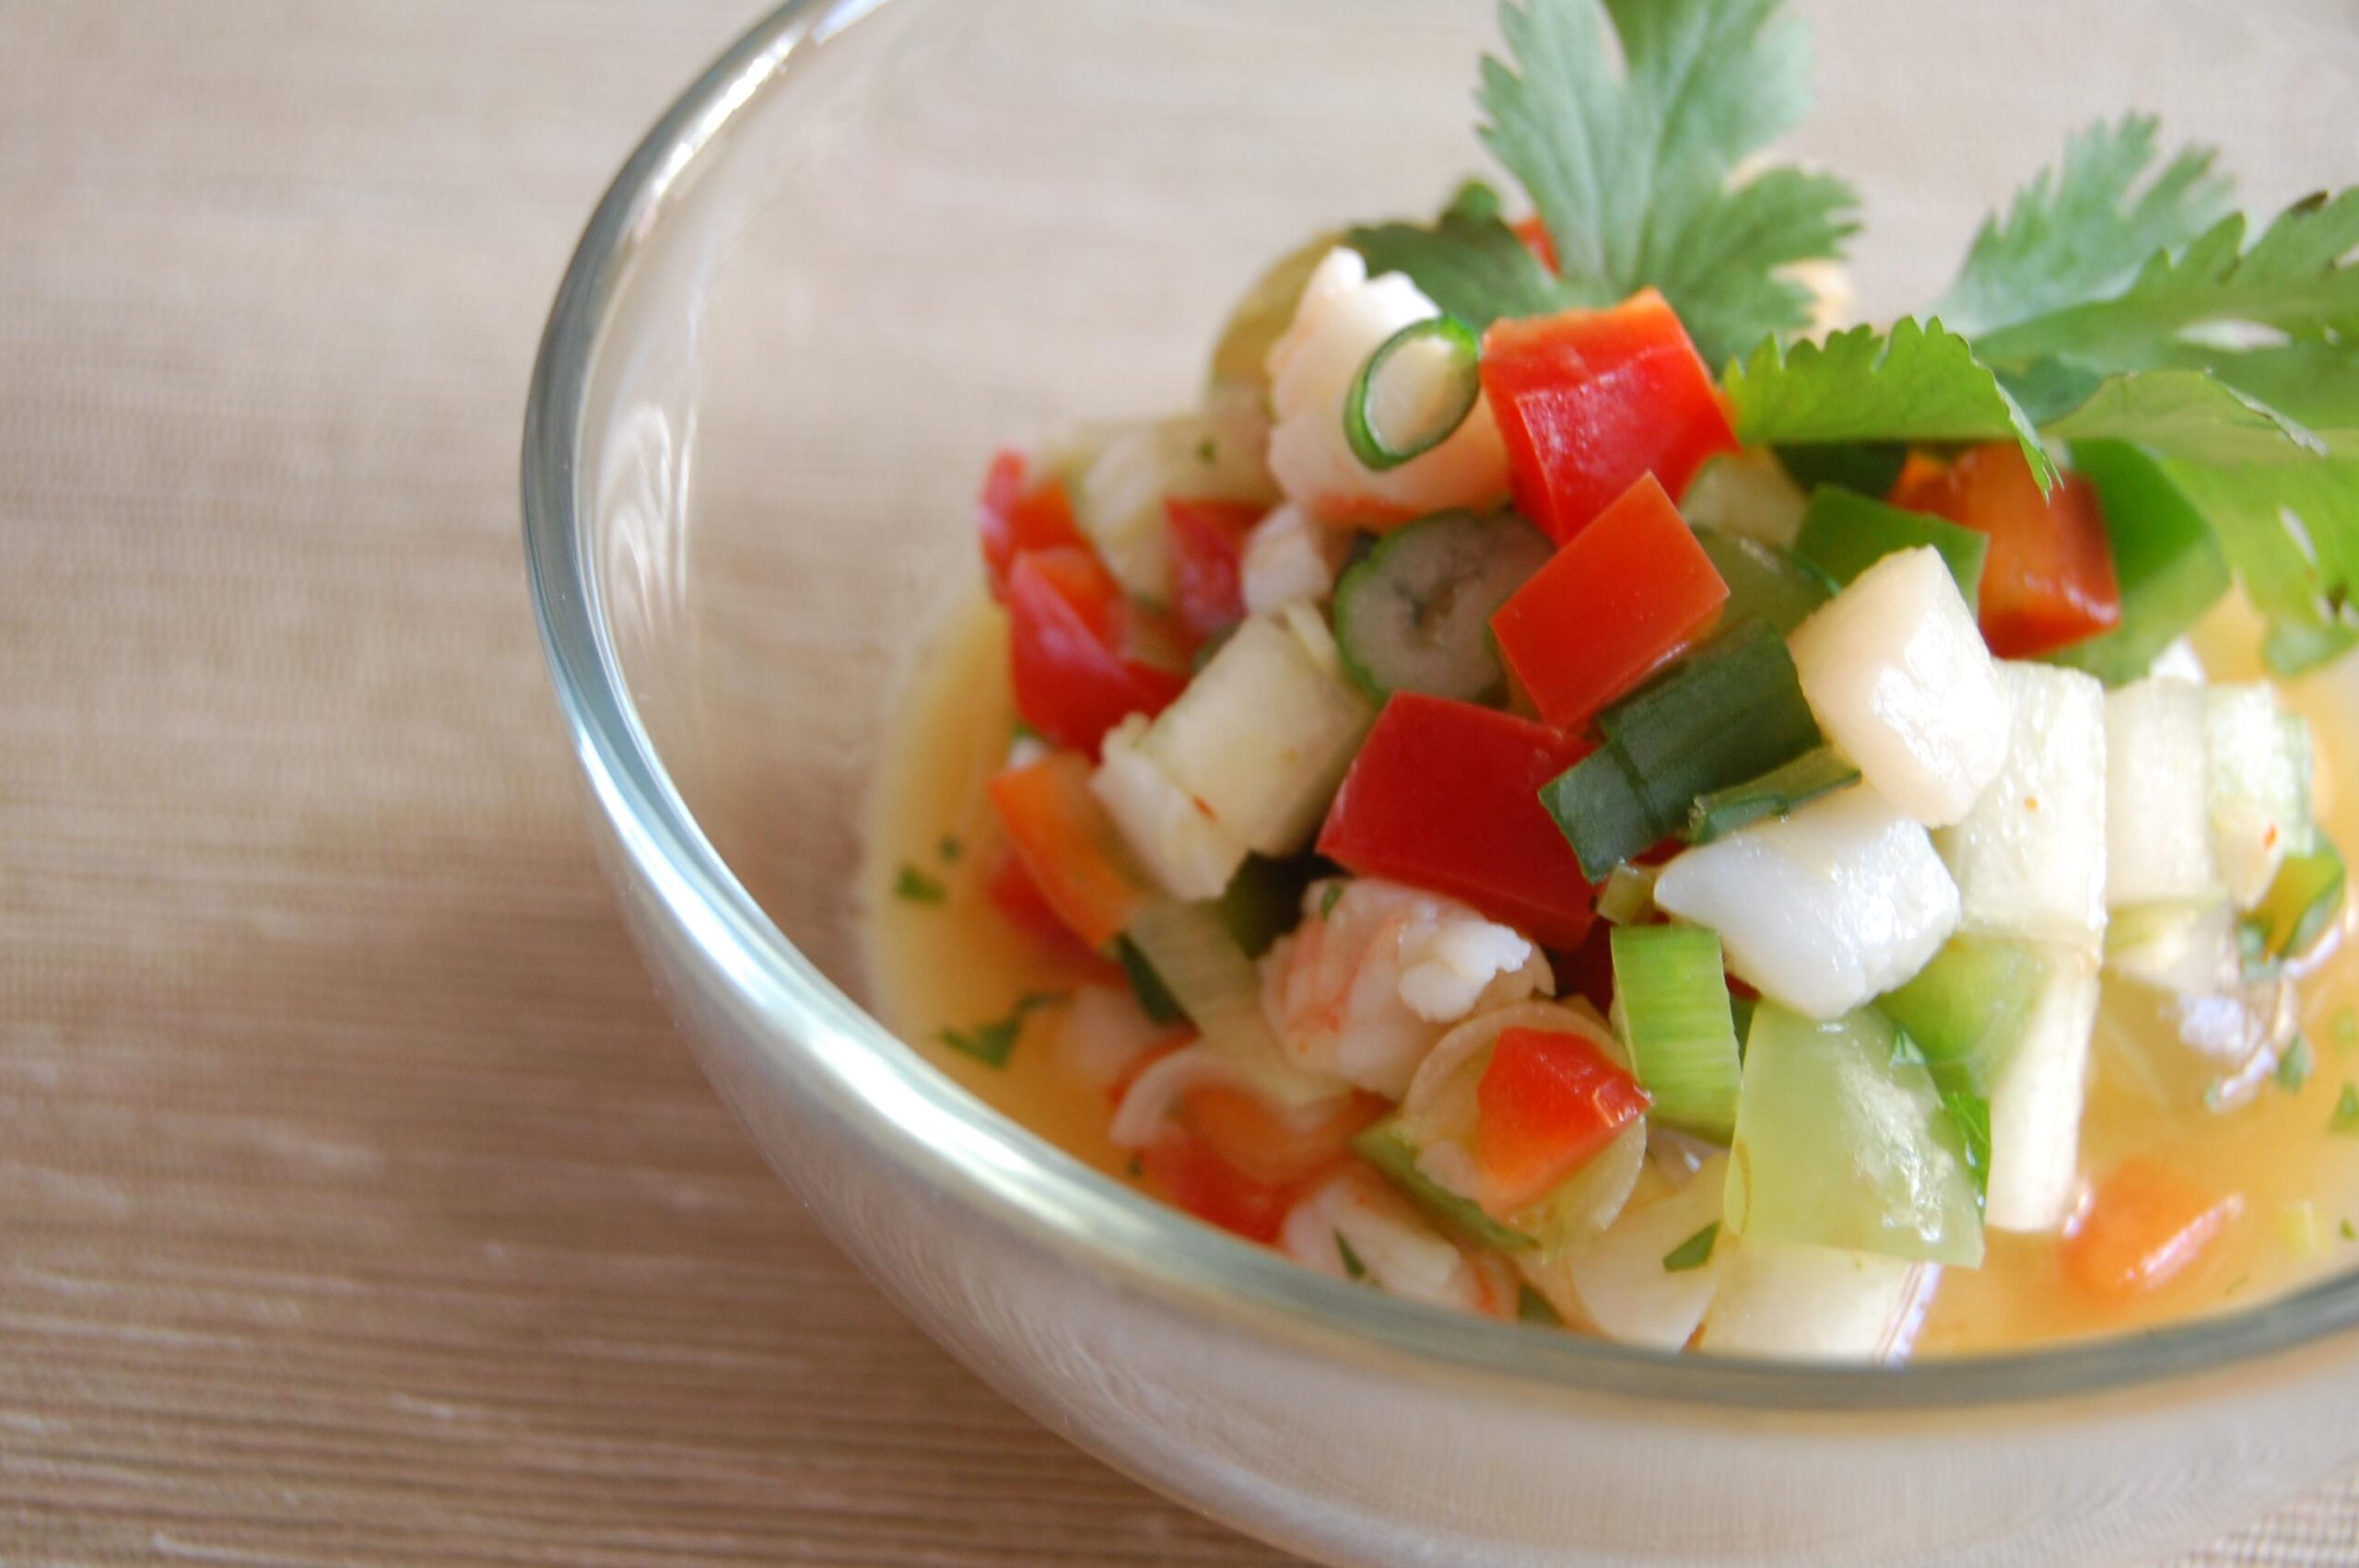  Freshly caught fish is the star ingredient of this Argentine ceviche recipe!